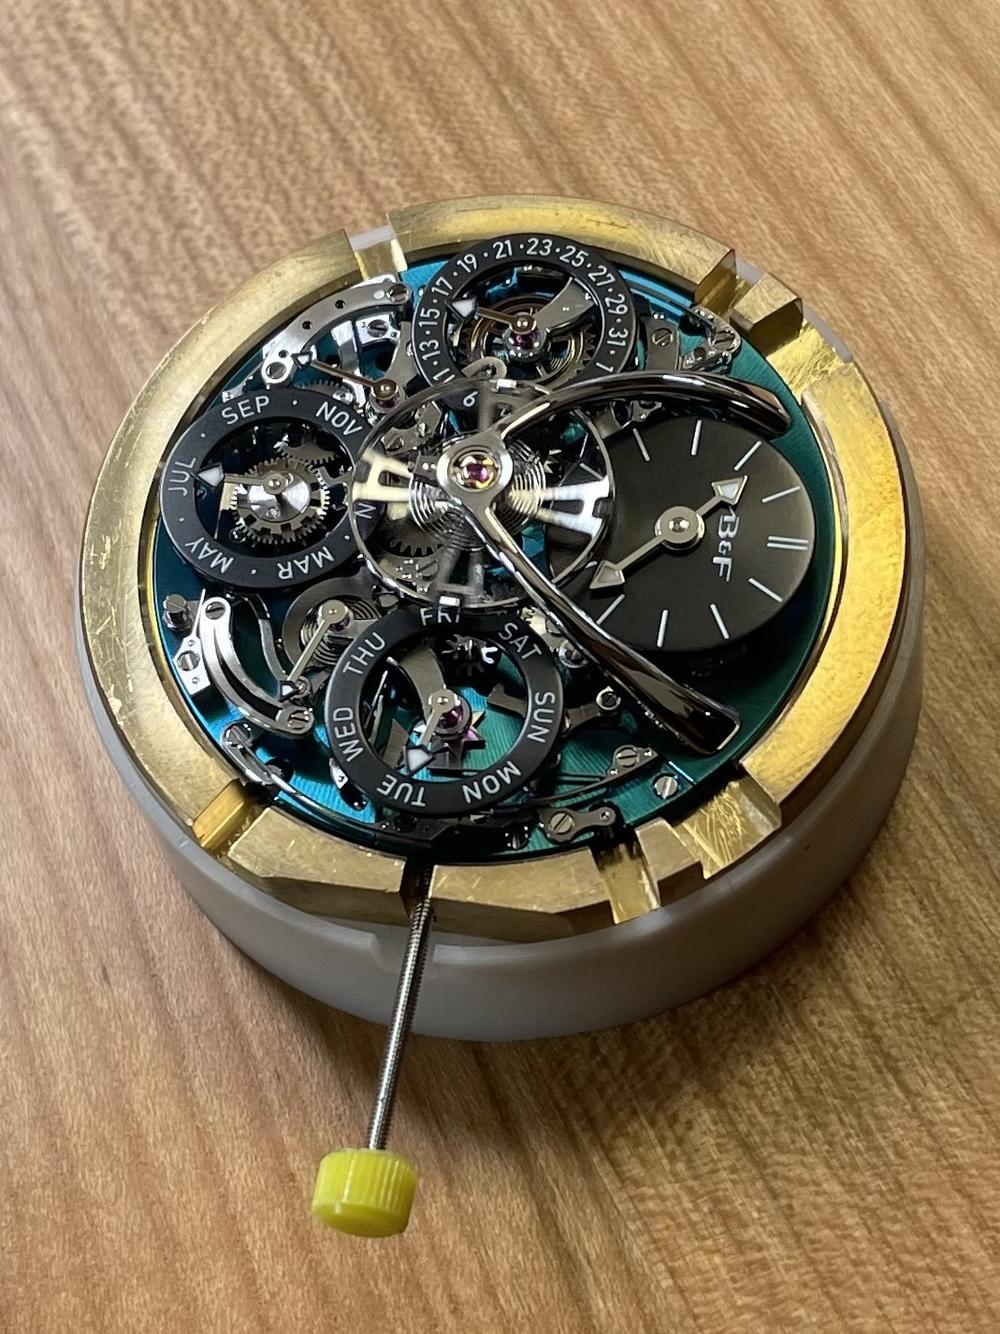 The face of an MB&F watch.